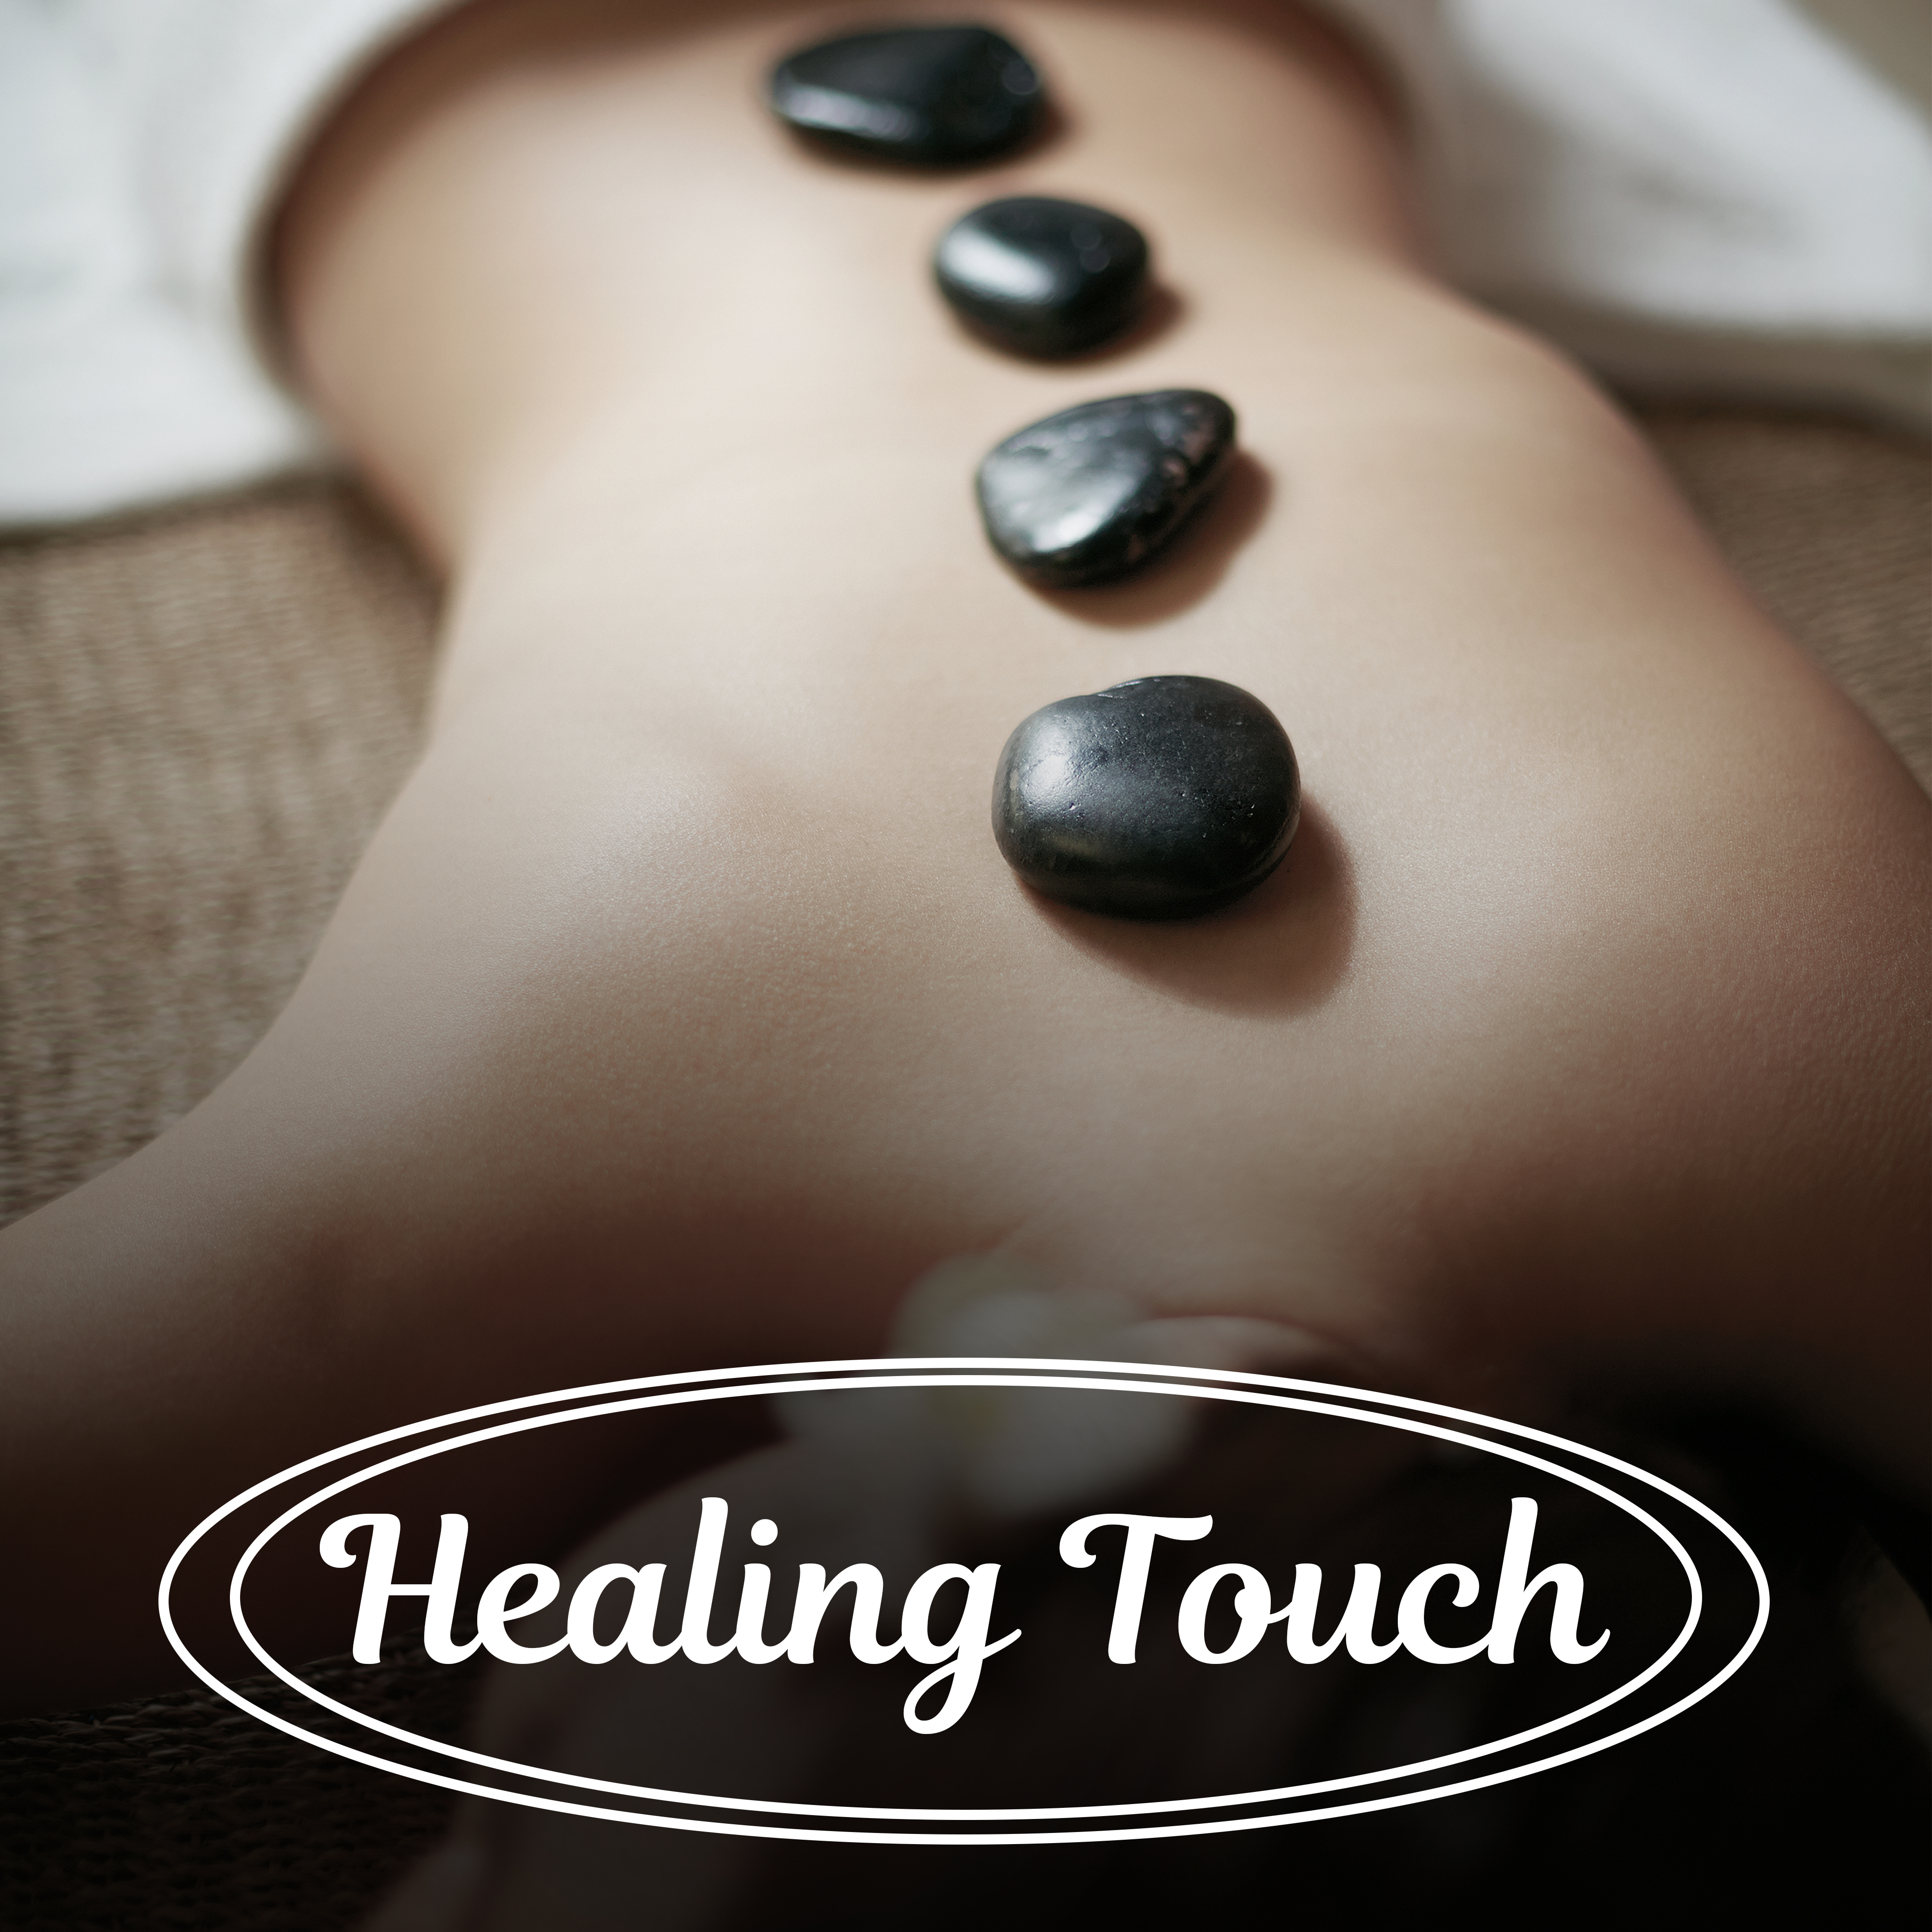 Healing Touch  Relaxation Sounds for Spa, Sensual Massage, Deep Sleep, Healthy Body, Serenity Spa, Relaxed Mind